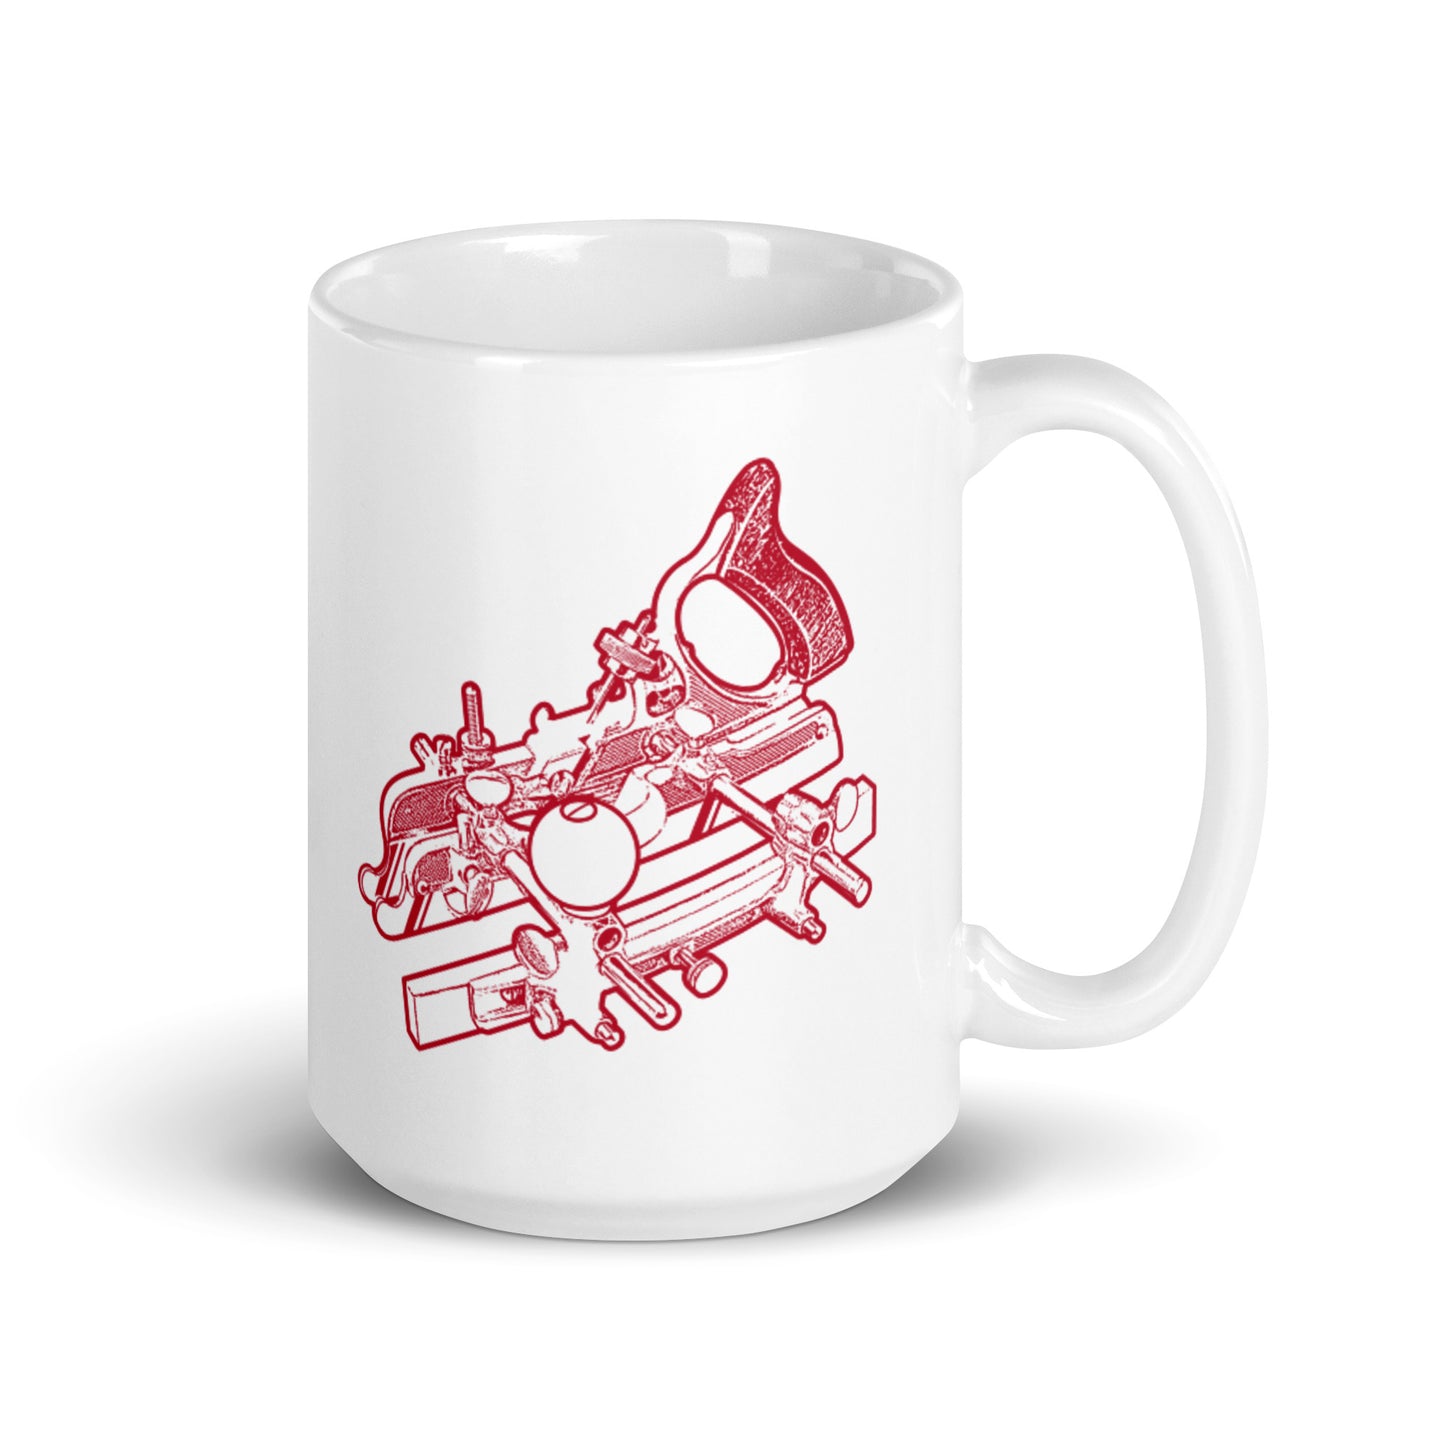 Stanley 45 Combination Plane Woodworking Gift Mug (Red)